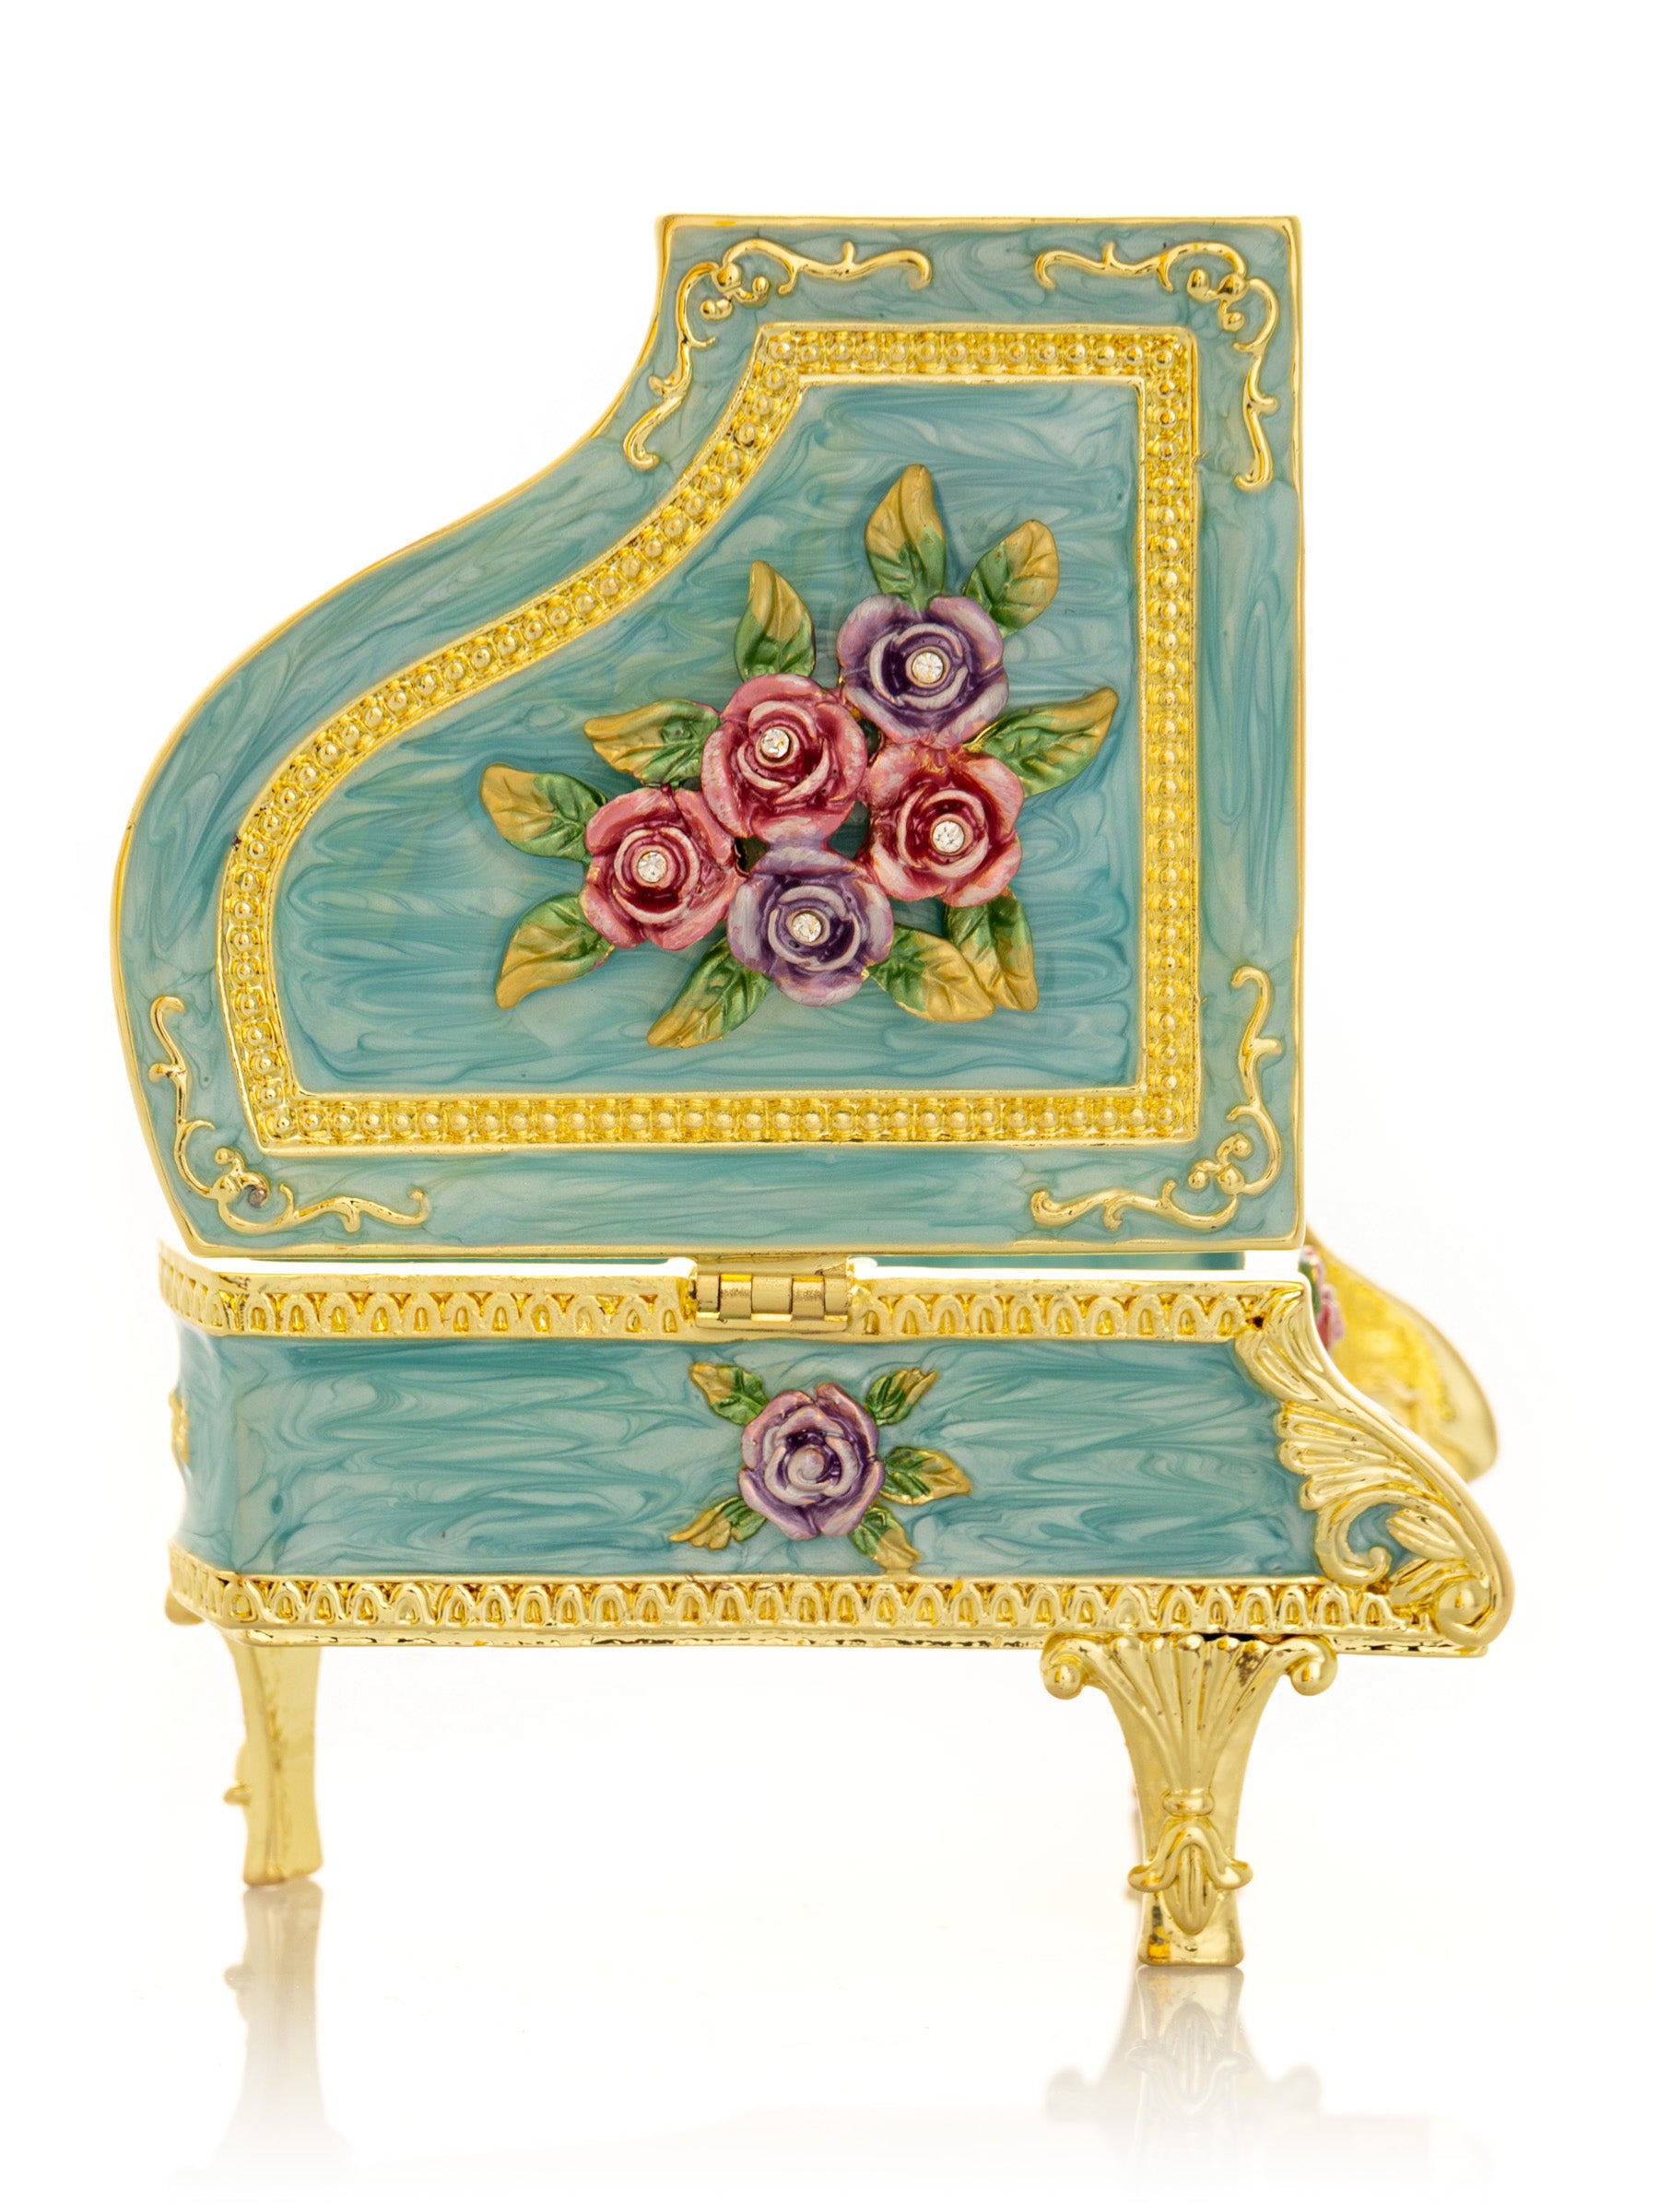 Turquoise Piano with Flowers